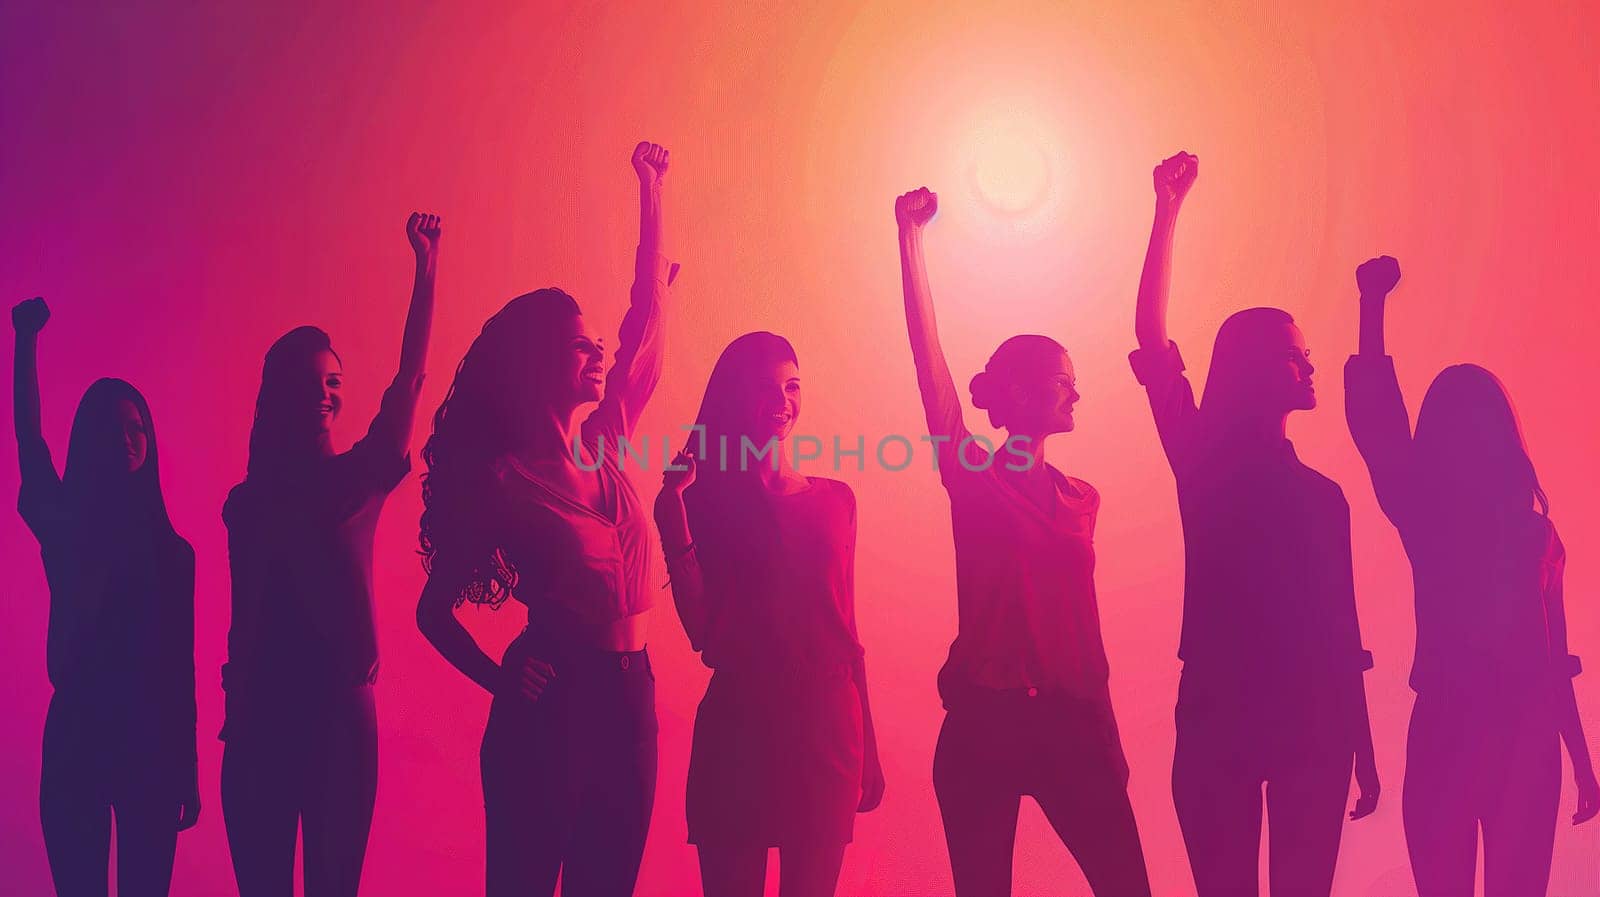 A group of women are standing together, raising their arms in the air in a celebratory manner. They are expressing unity and empowerment on Womens Day.